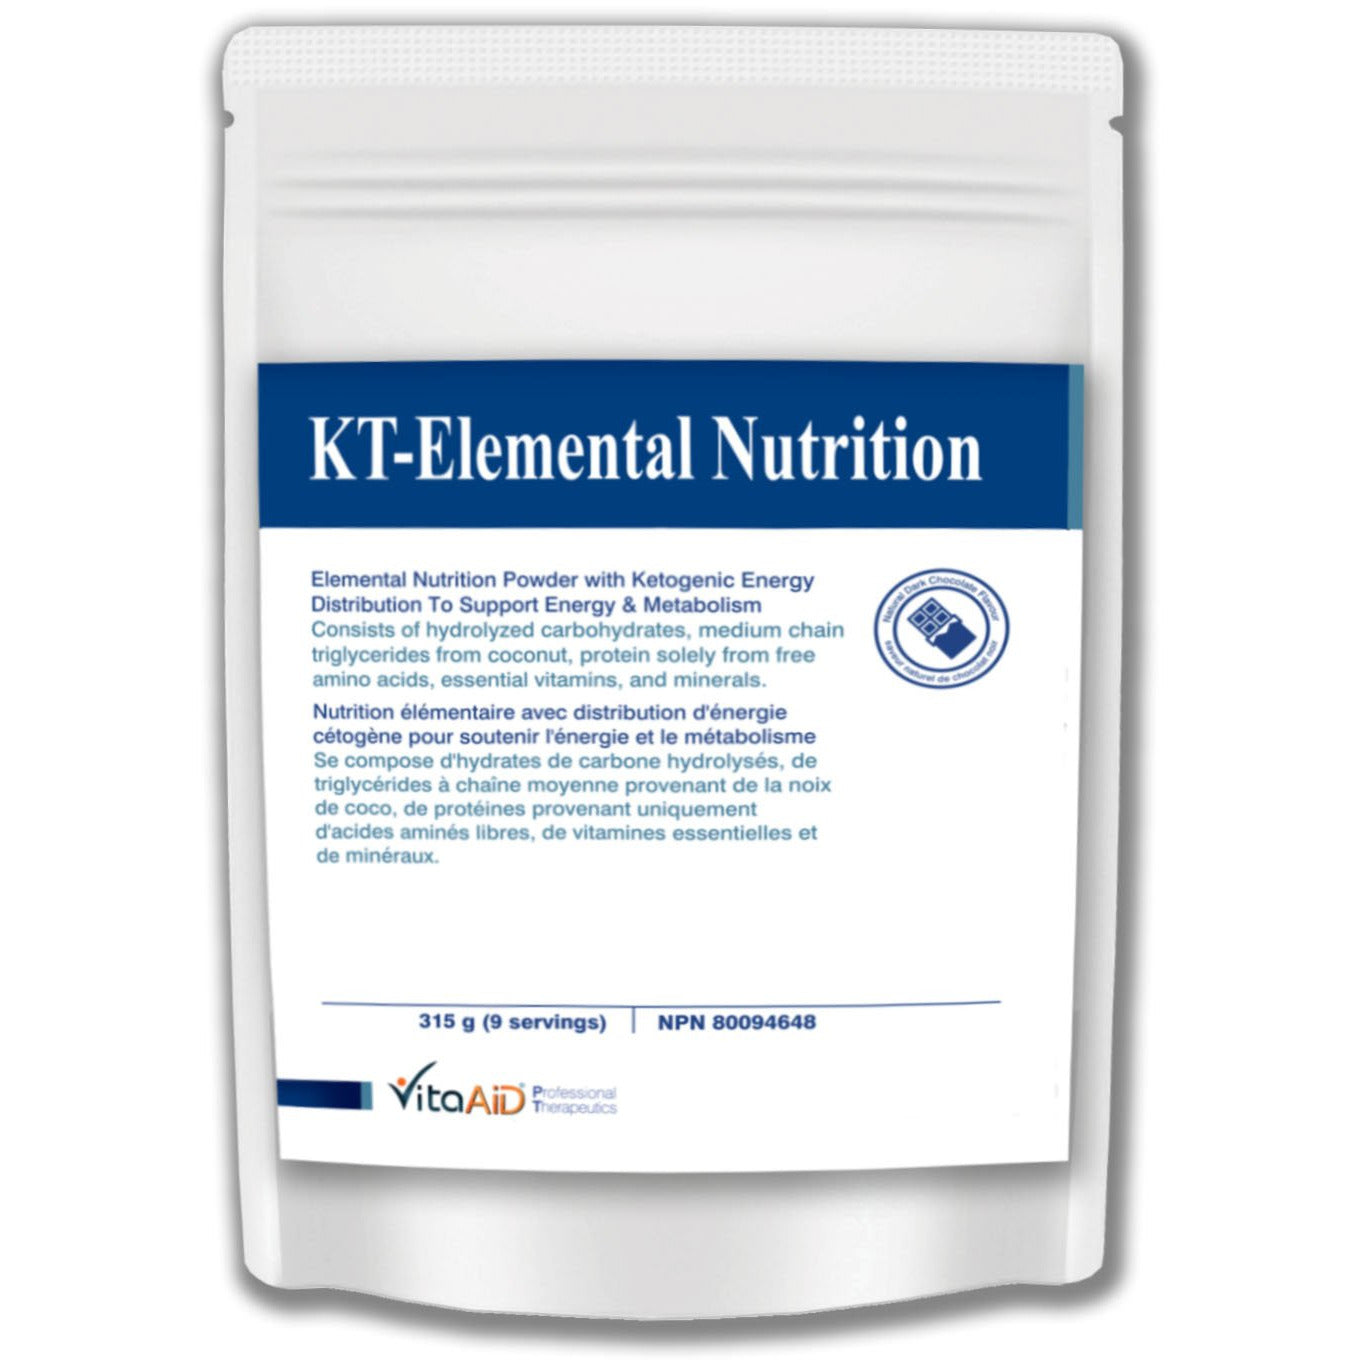 Keto-Elemental Nutrition (Chocolate) Elemental Nutrition Powder with Ketogenic Caloric Distributions for Gastrointestinal Support 315 g